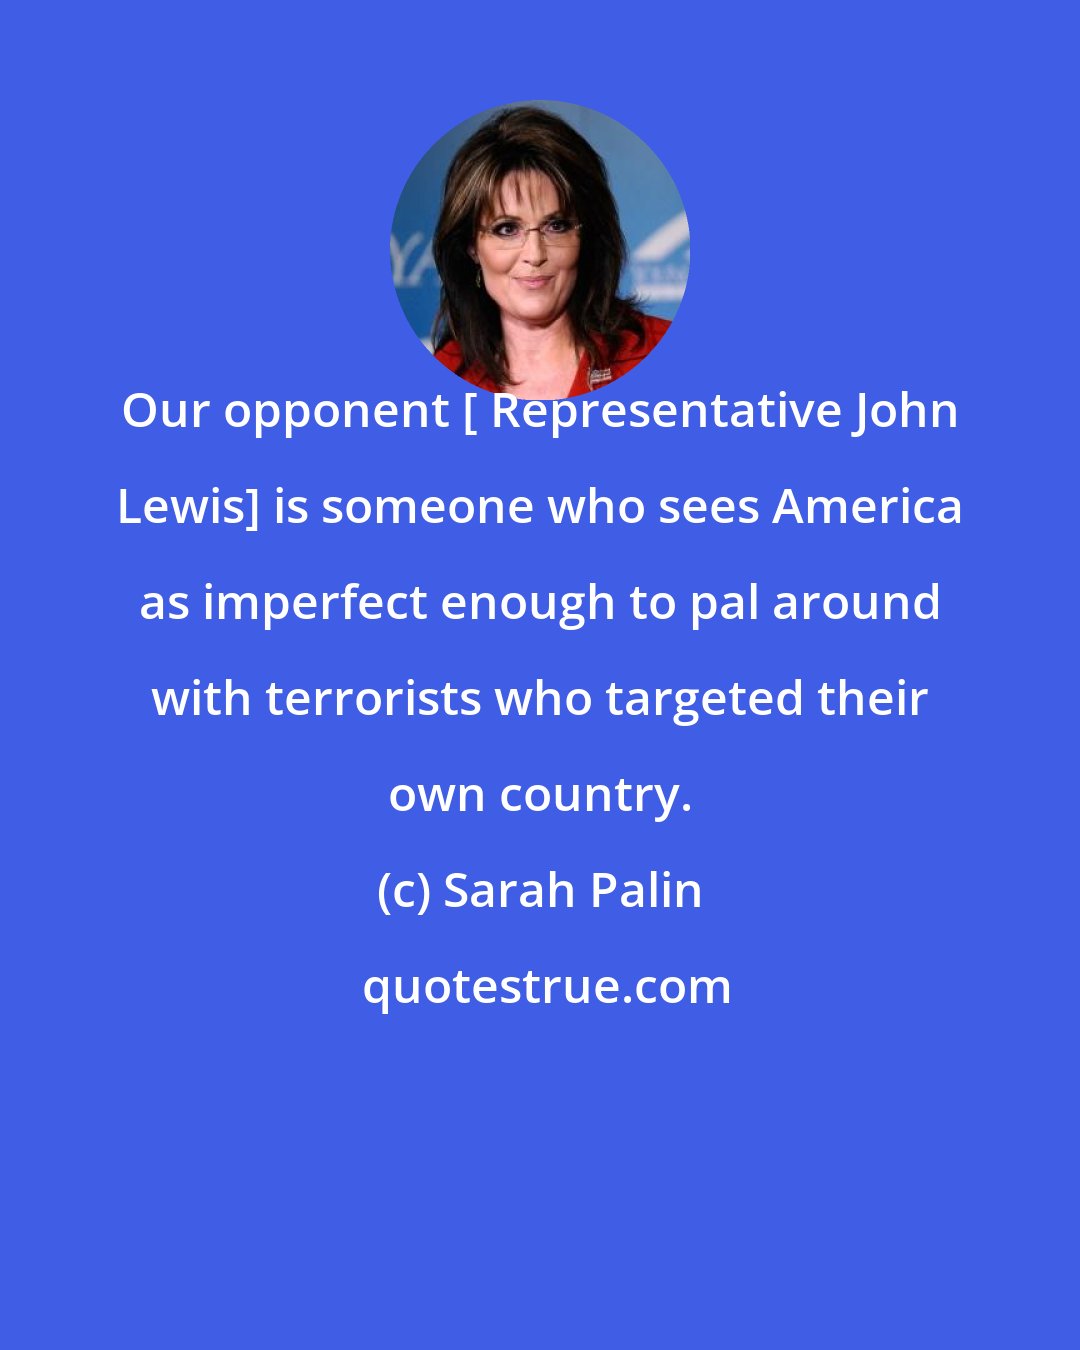 Sarah Palin: Our opponent [ Representative John Lewis] is someone who sees America as imperfect enough to pal around with terrorists who targeted their own country.